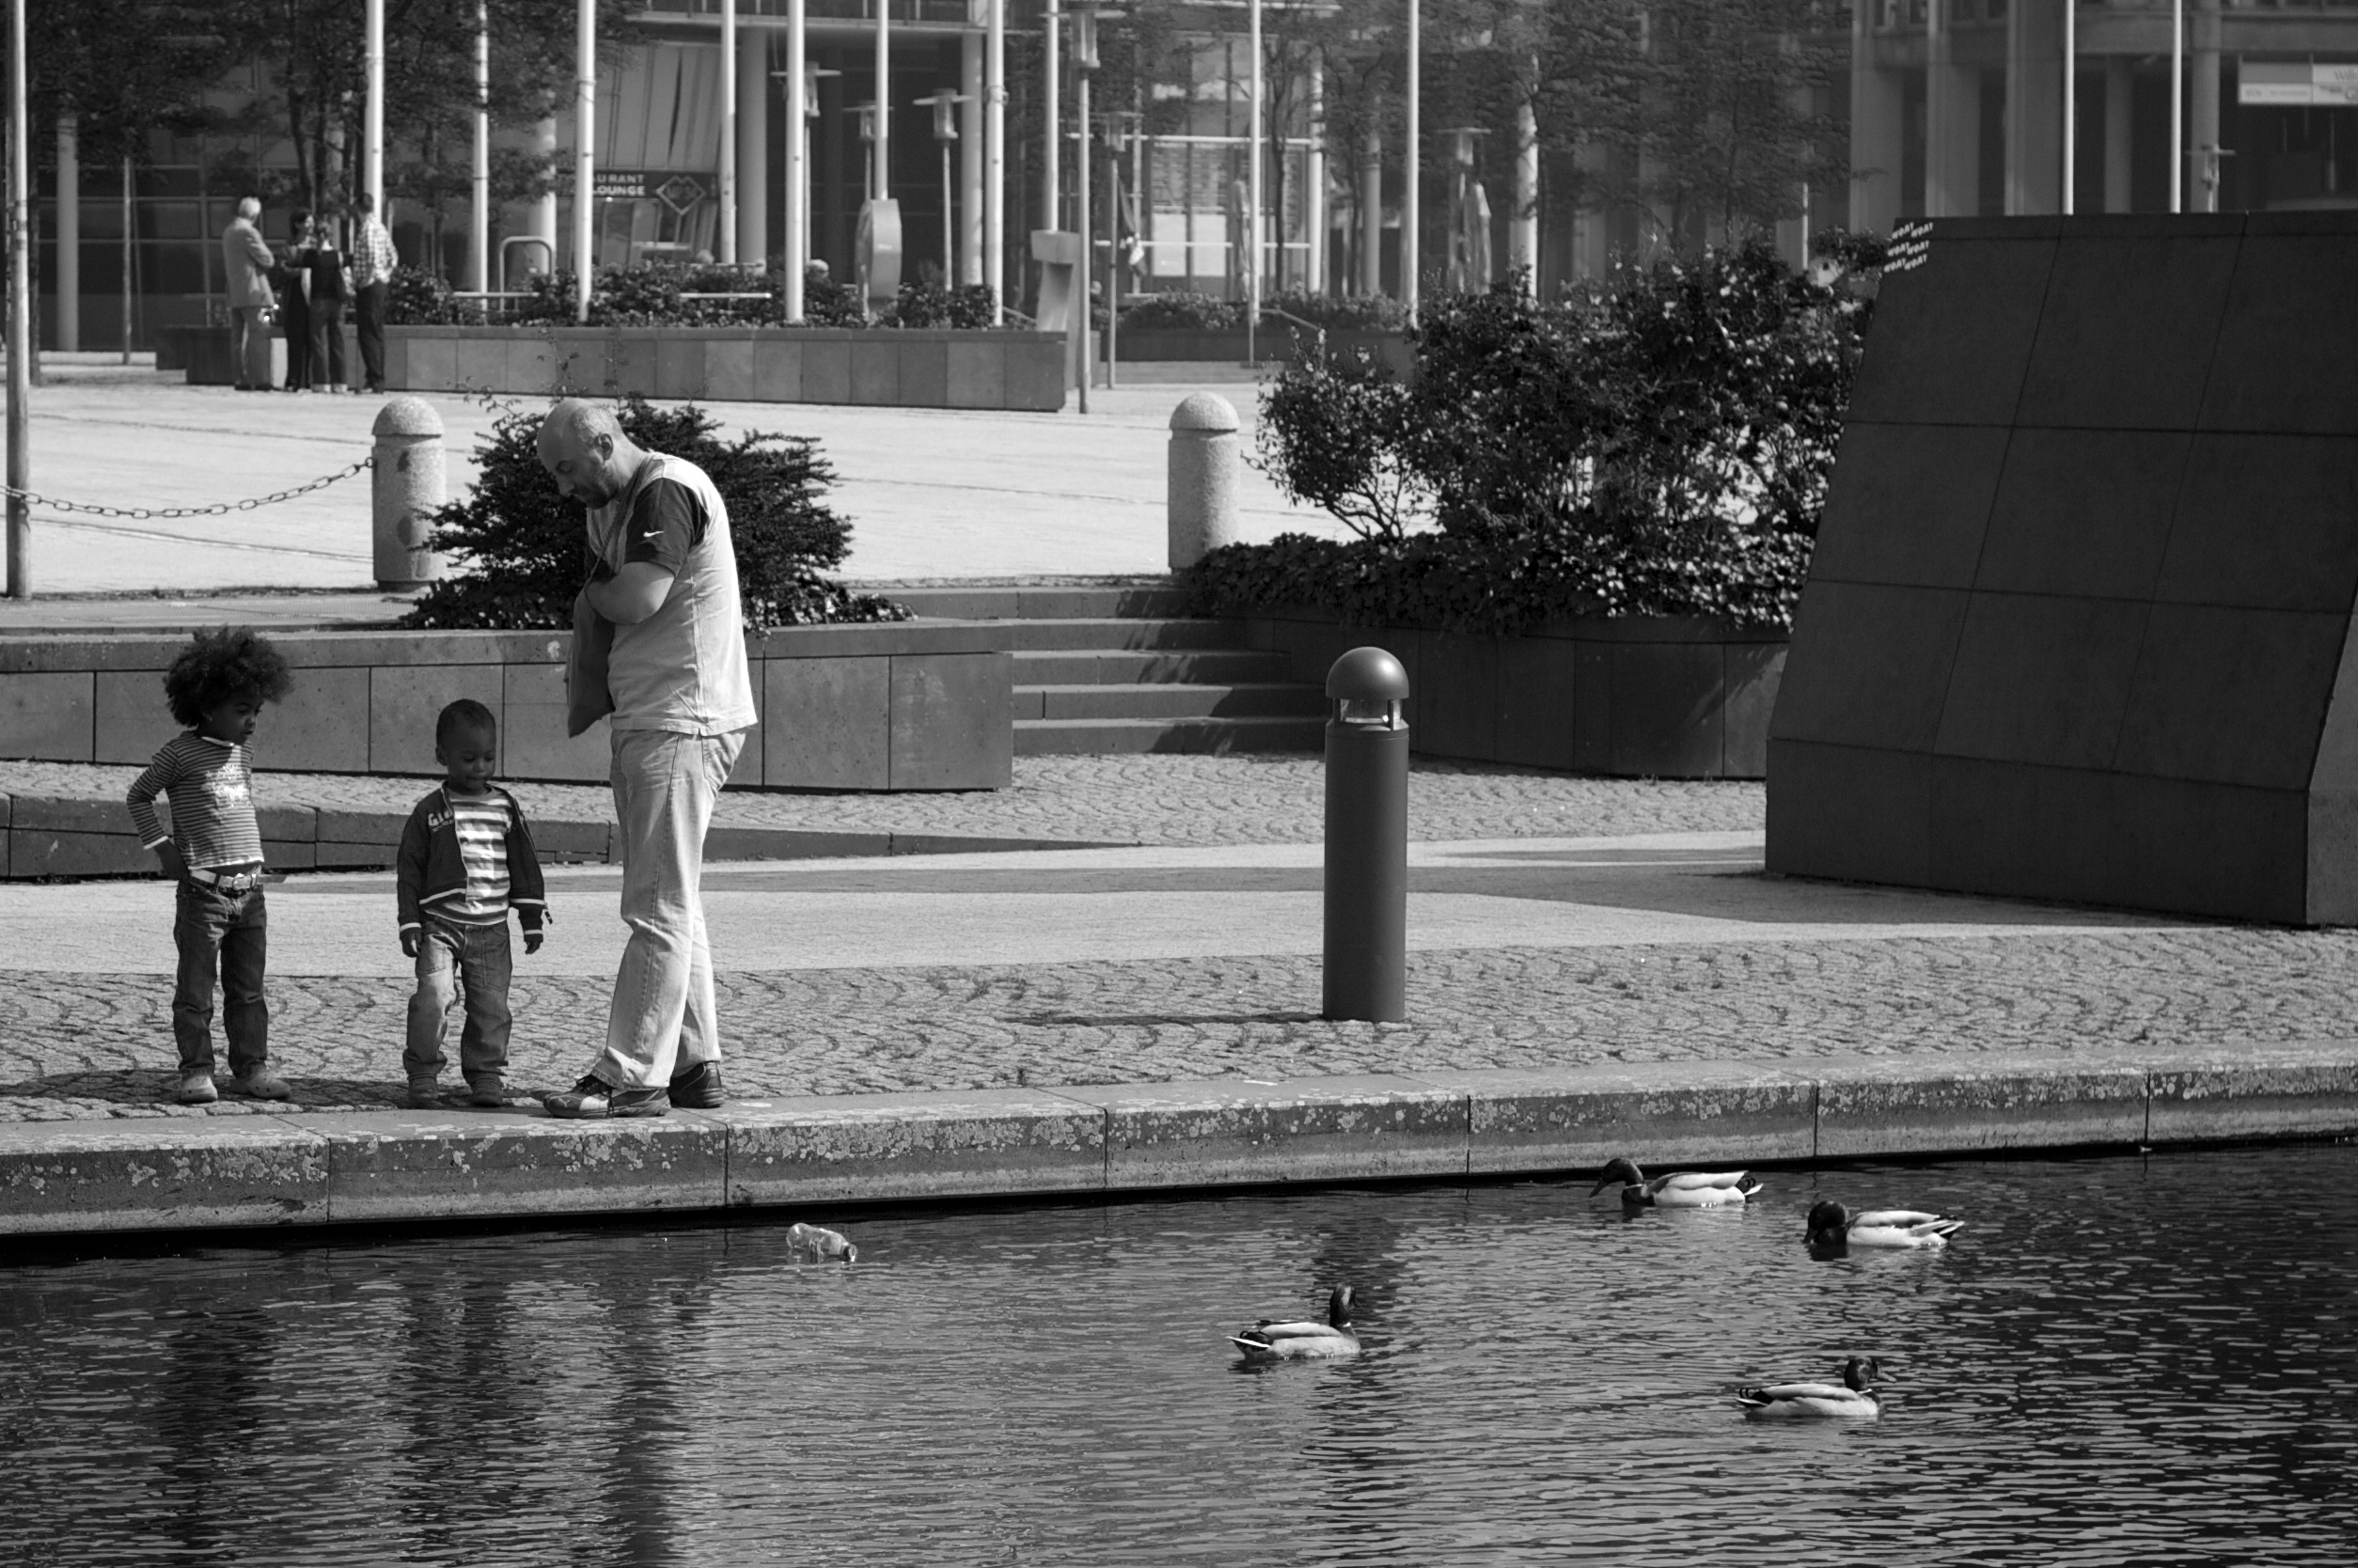 Probably a father with his children, watching and feeding ducks.